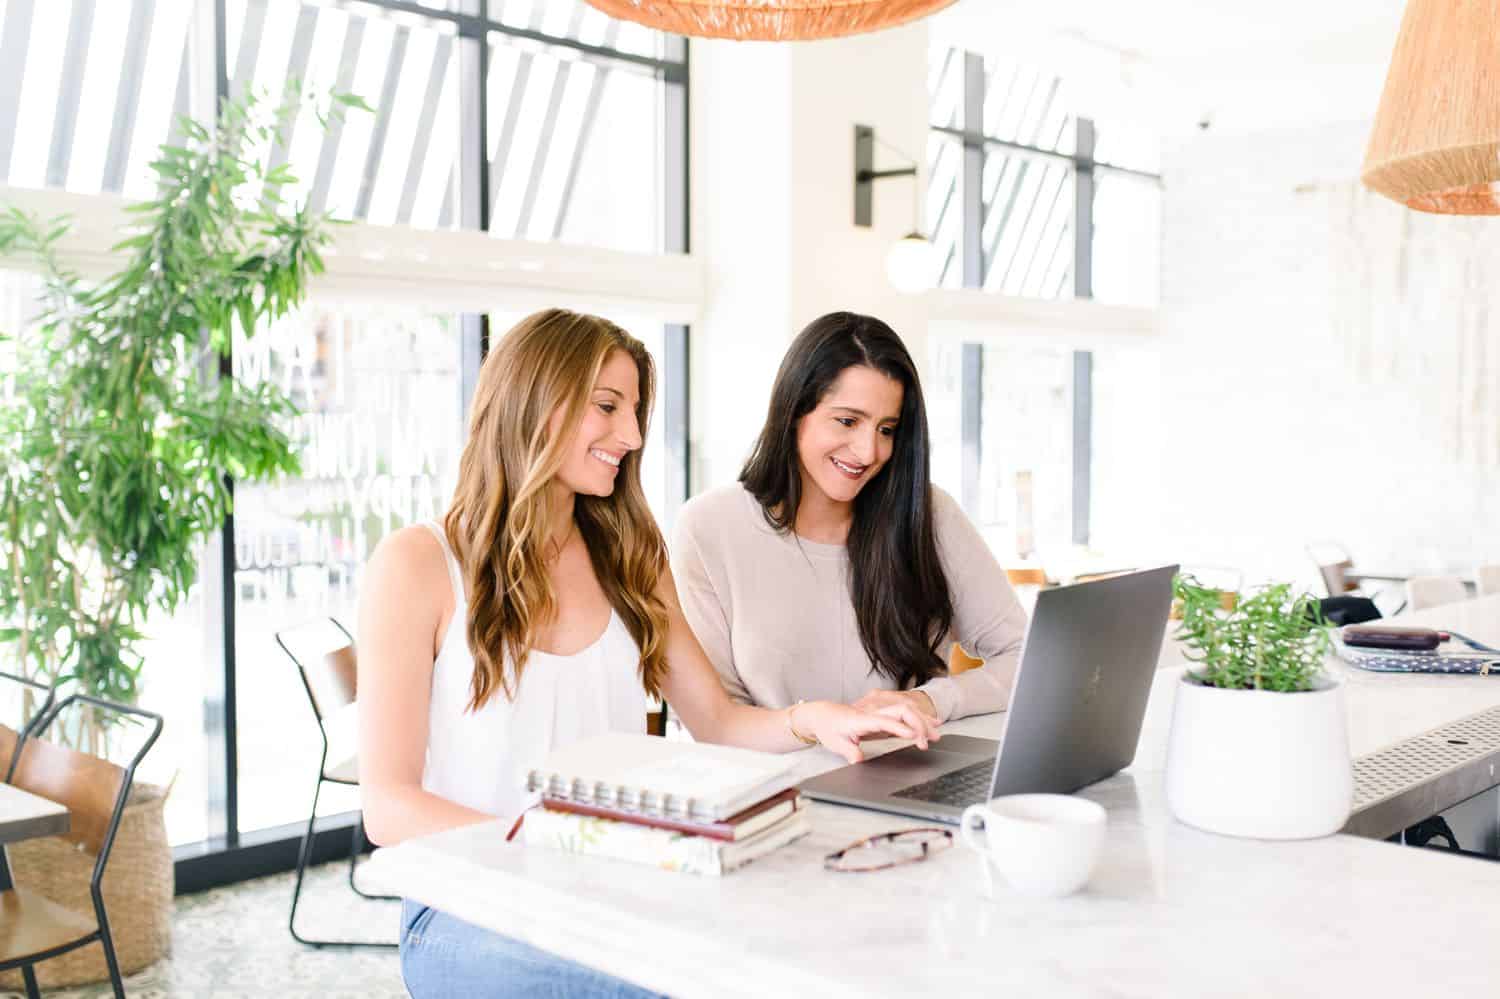 Women working at a laptop in a bright office.